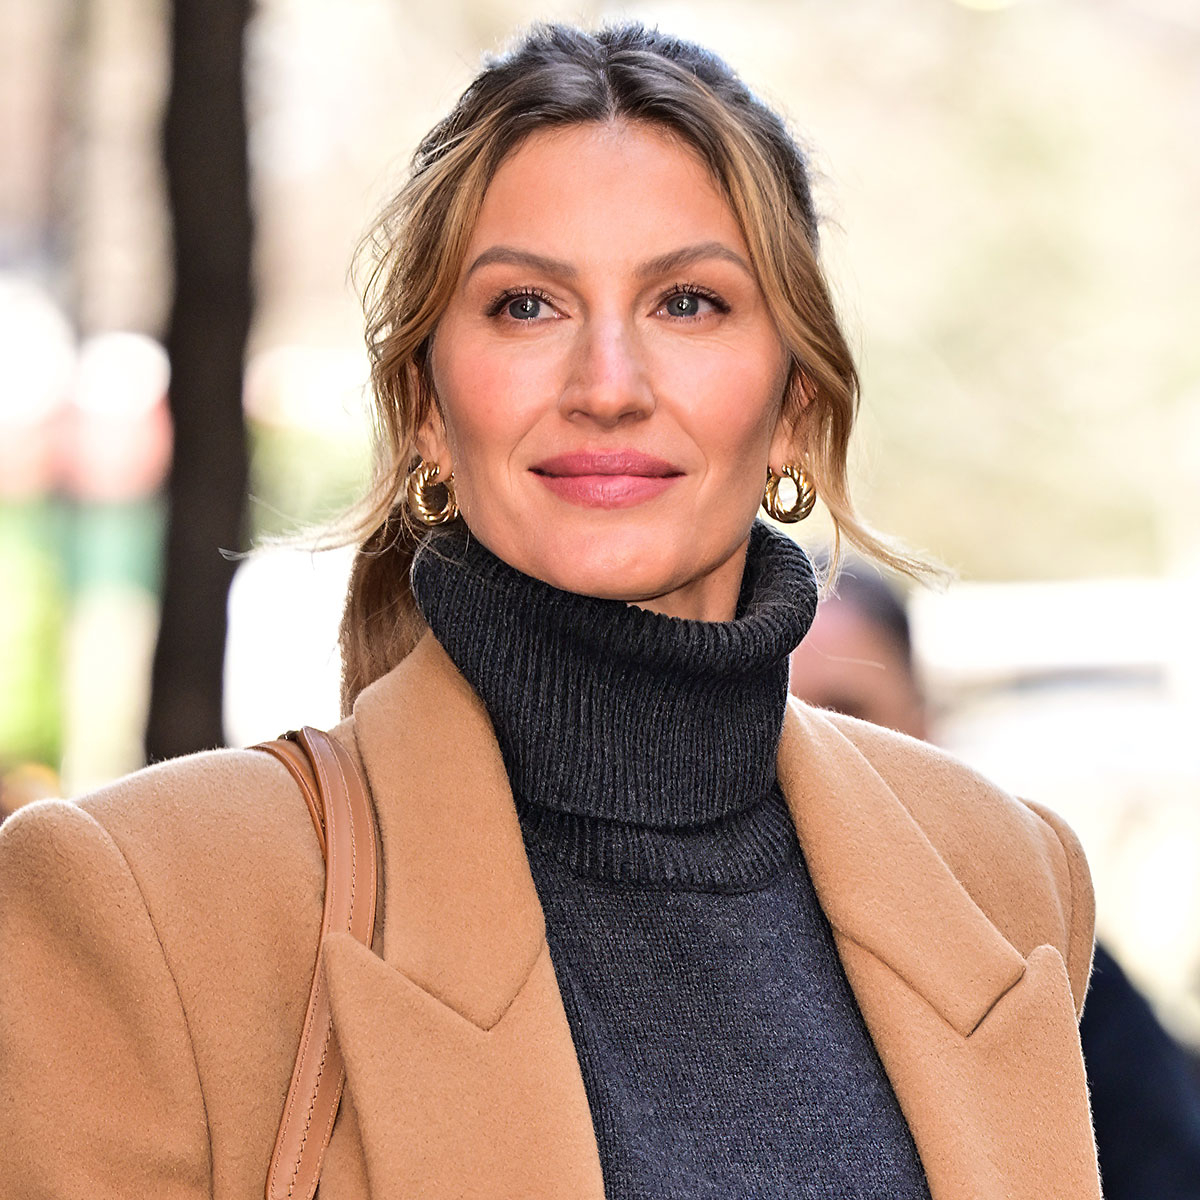 Gisele Bündchen Denies Cheating on Ex Tom Brady and Confirms She's Dating Again